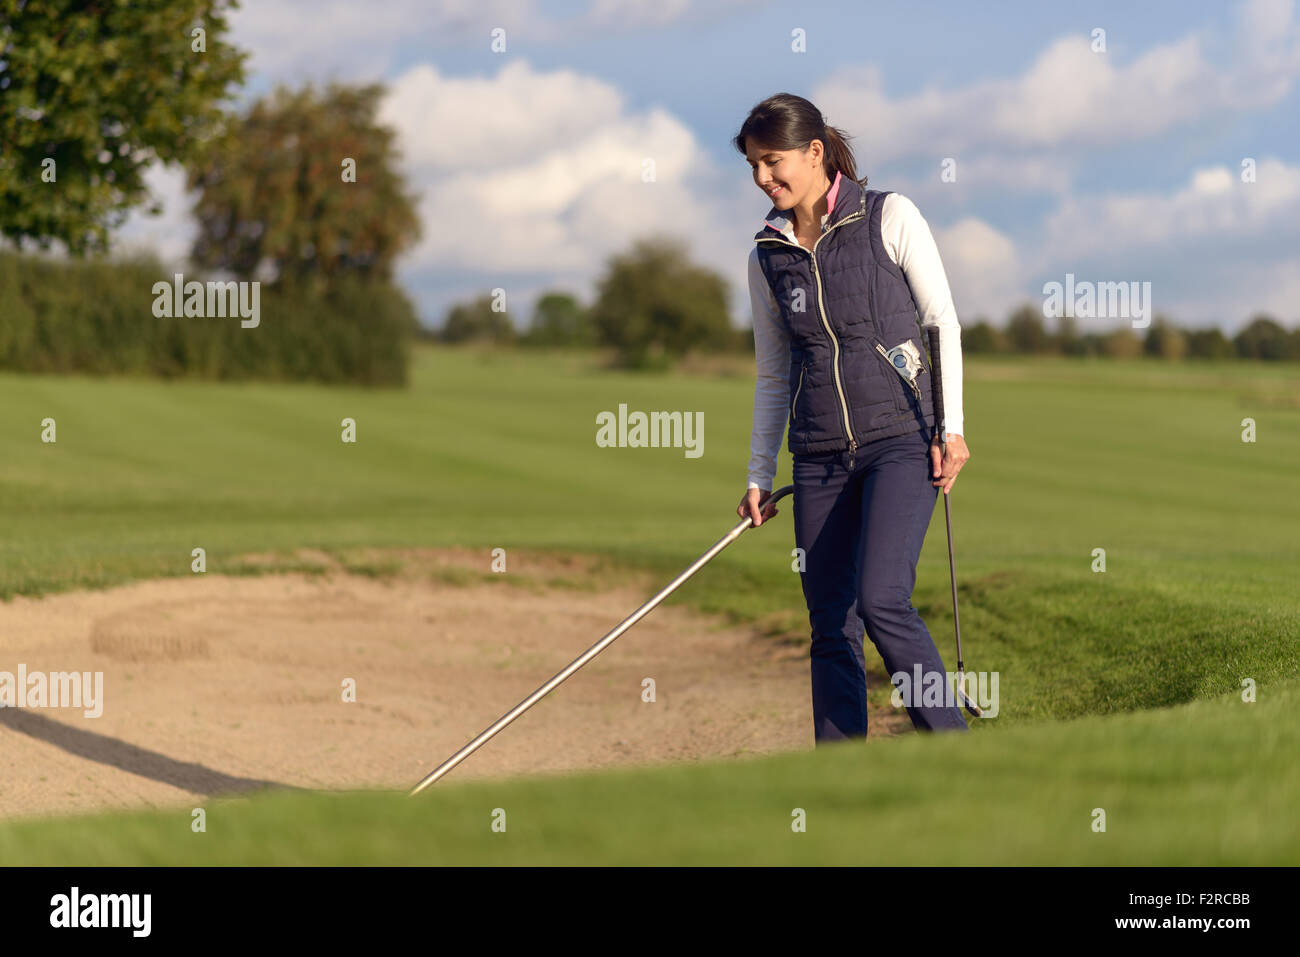 Woman golfer raking a sand bunker on a golf course to level off the surface after she has played her shot to retrieve her ball Stock Photo